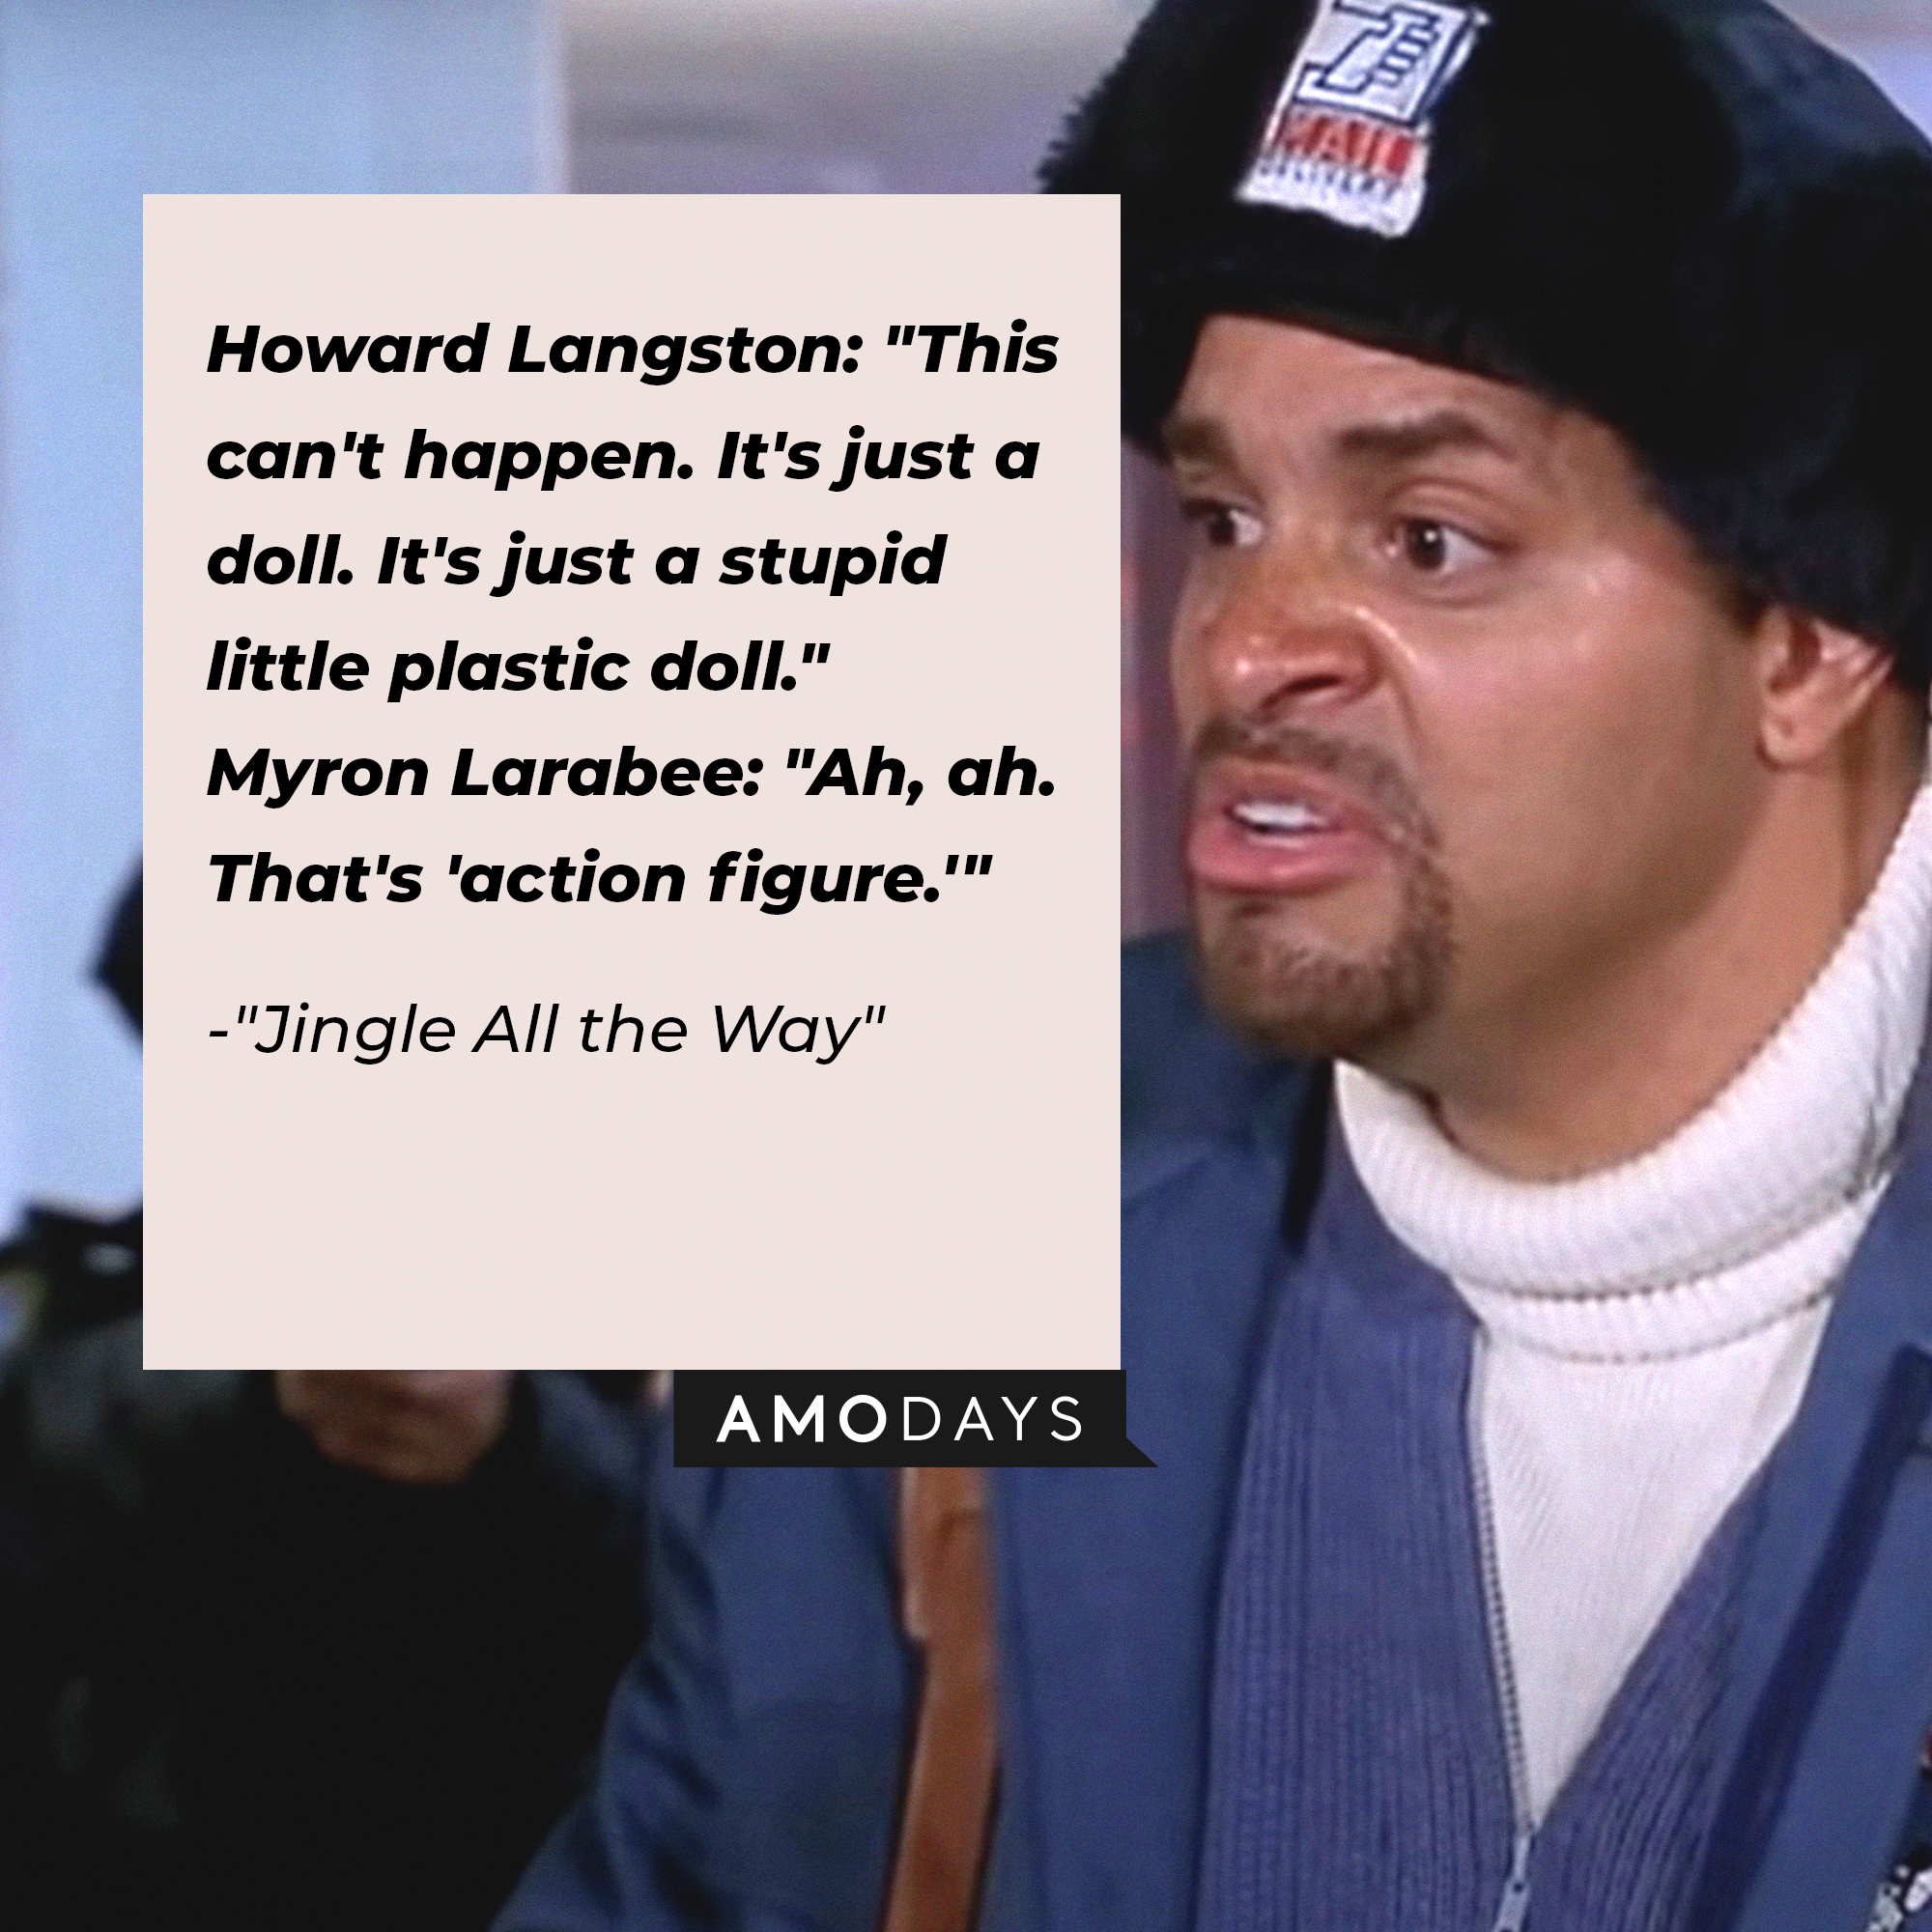 Quote from "Jingle All the Way":\\\\\\\\\\\\\\\\u00a0Howard Langston: "This can't happen. It's just a doll. It's just a stupid little plastic doll." / Myron Larabee: "Ah, ah. That's 'action figure.'"\\\\\\\\\\\\\\\\u00a0| Source: Facebook.com/JingleAllTheWayMovies